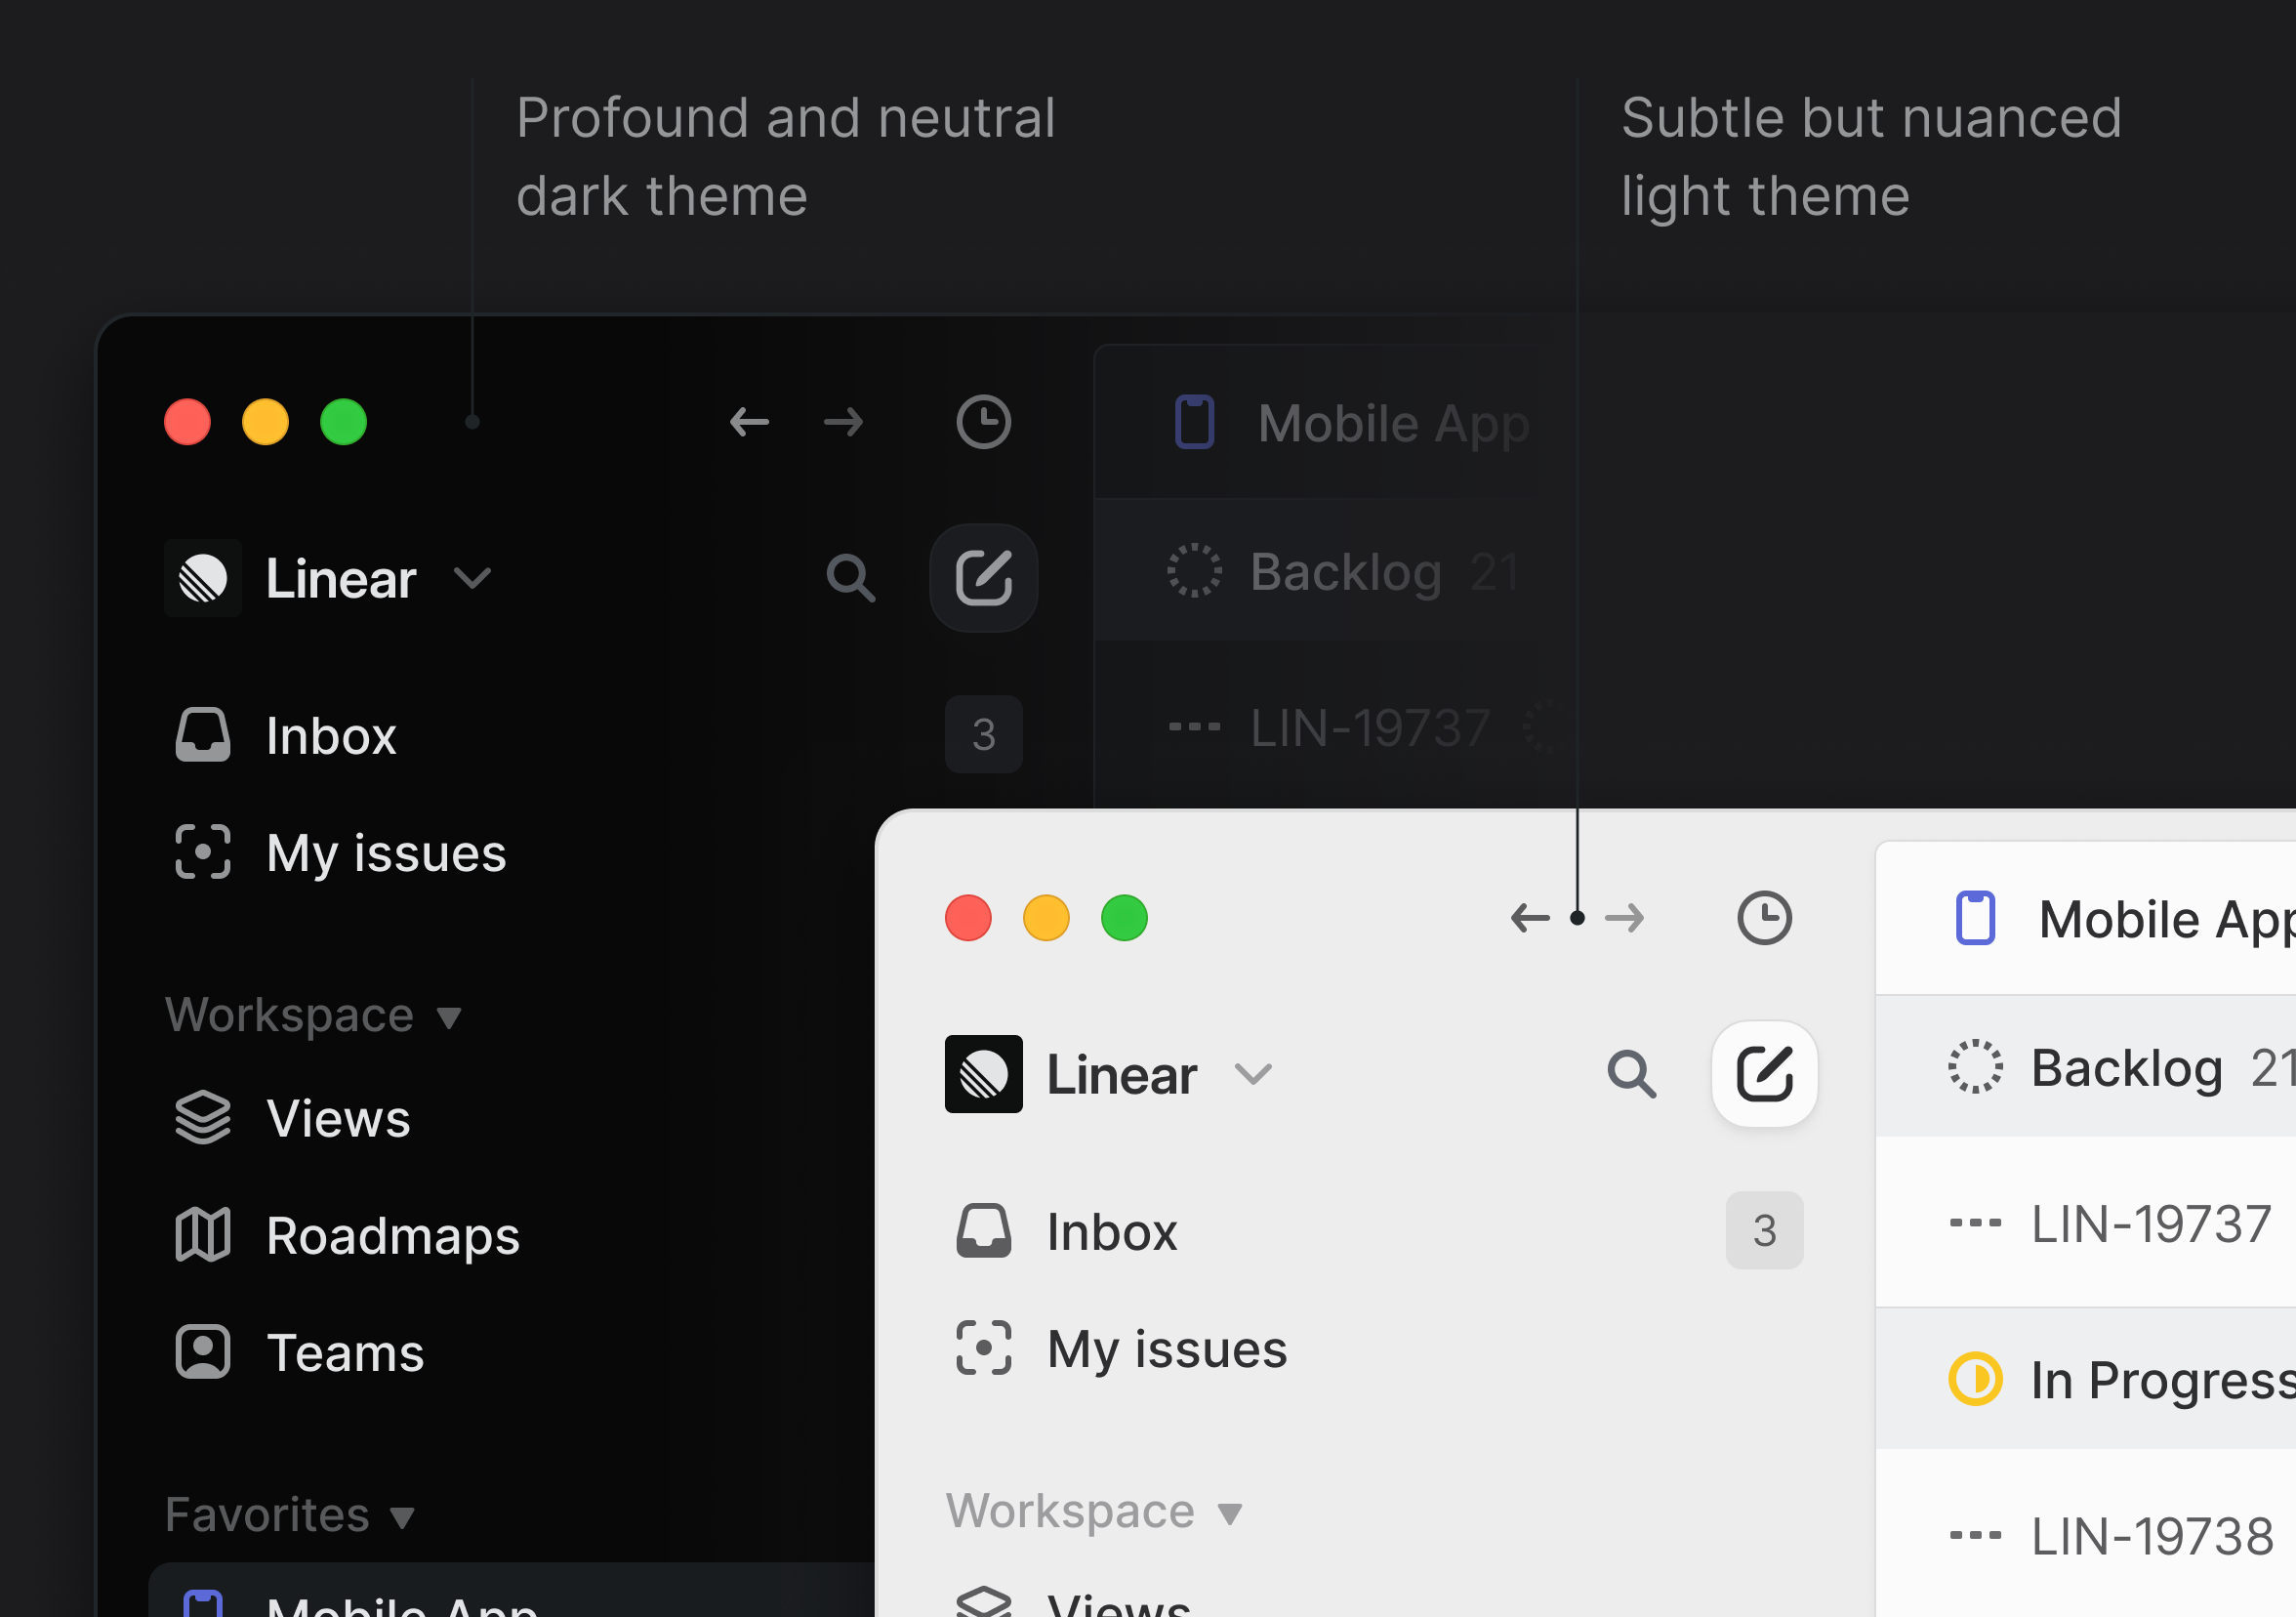 Our new light and dark themes